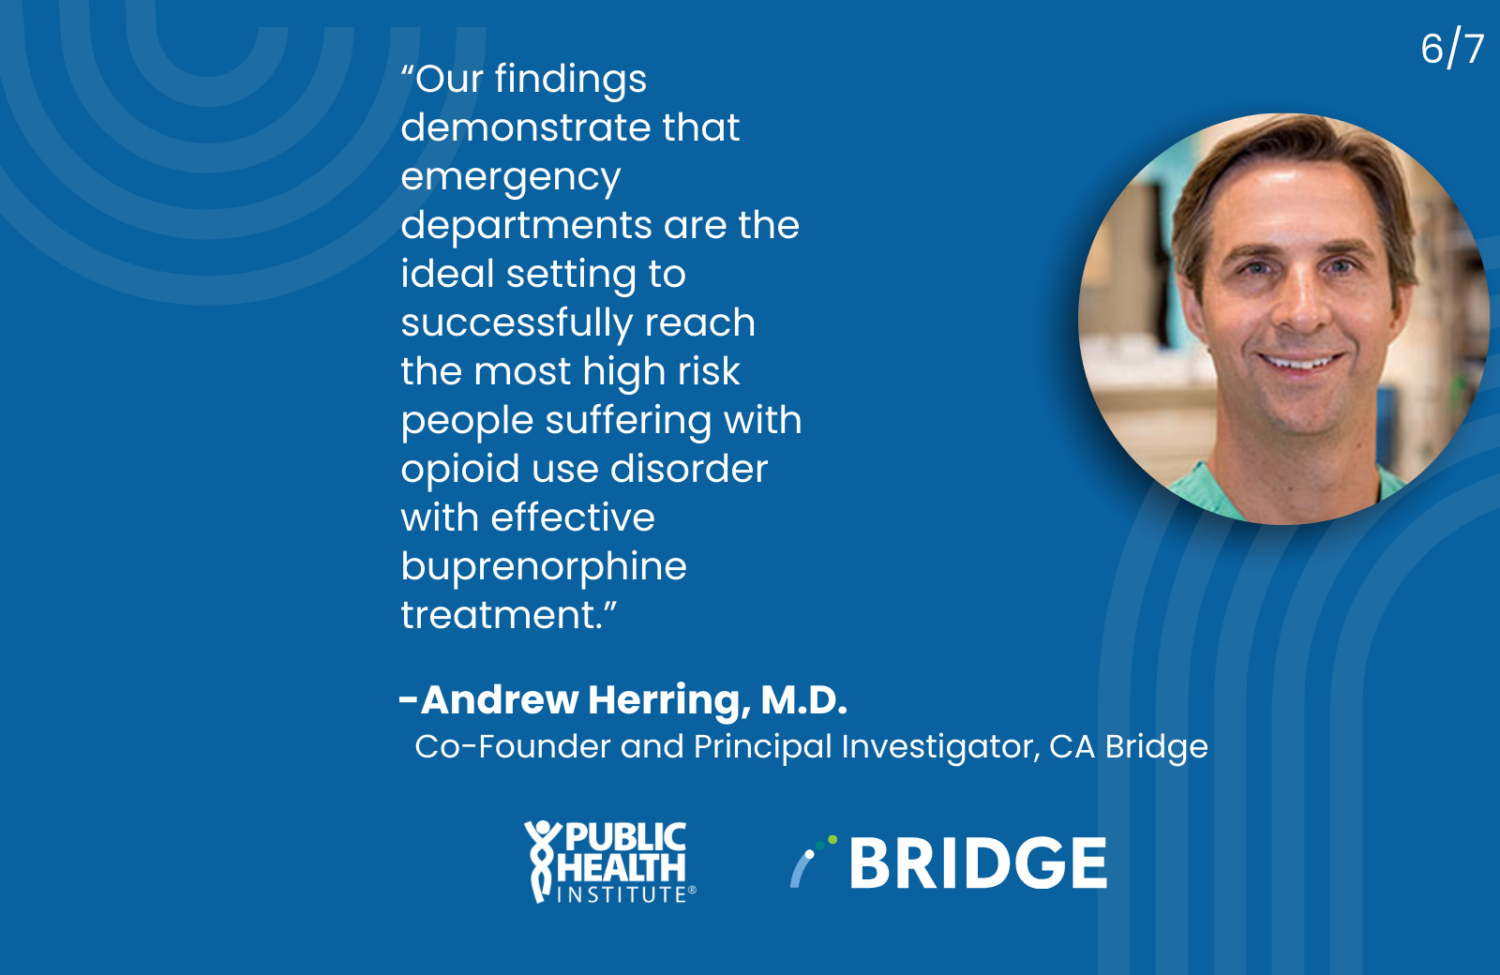 “Our findings demonstrate that emergency departments are the ideal setting to successfully reach the most high risk people suffering with opioid use disorder with effective buprenorphine treatment.” -Andrew Herring, M.D. Co-Founder and Principal Investigator, CA Bridge, Public Health Institute